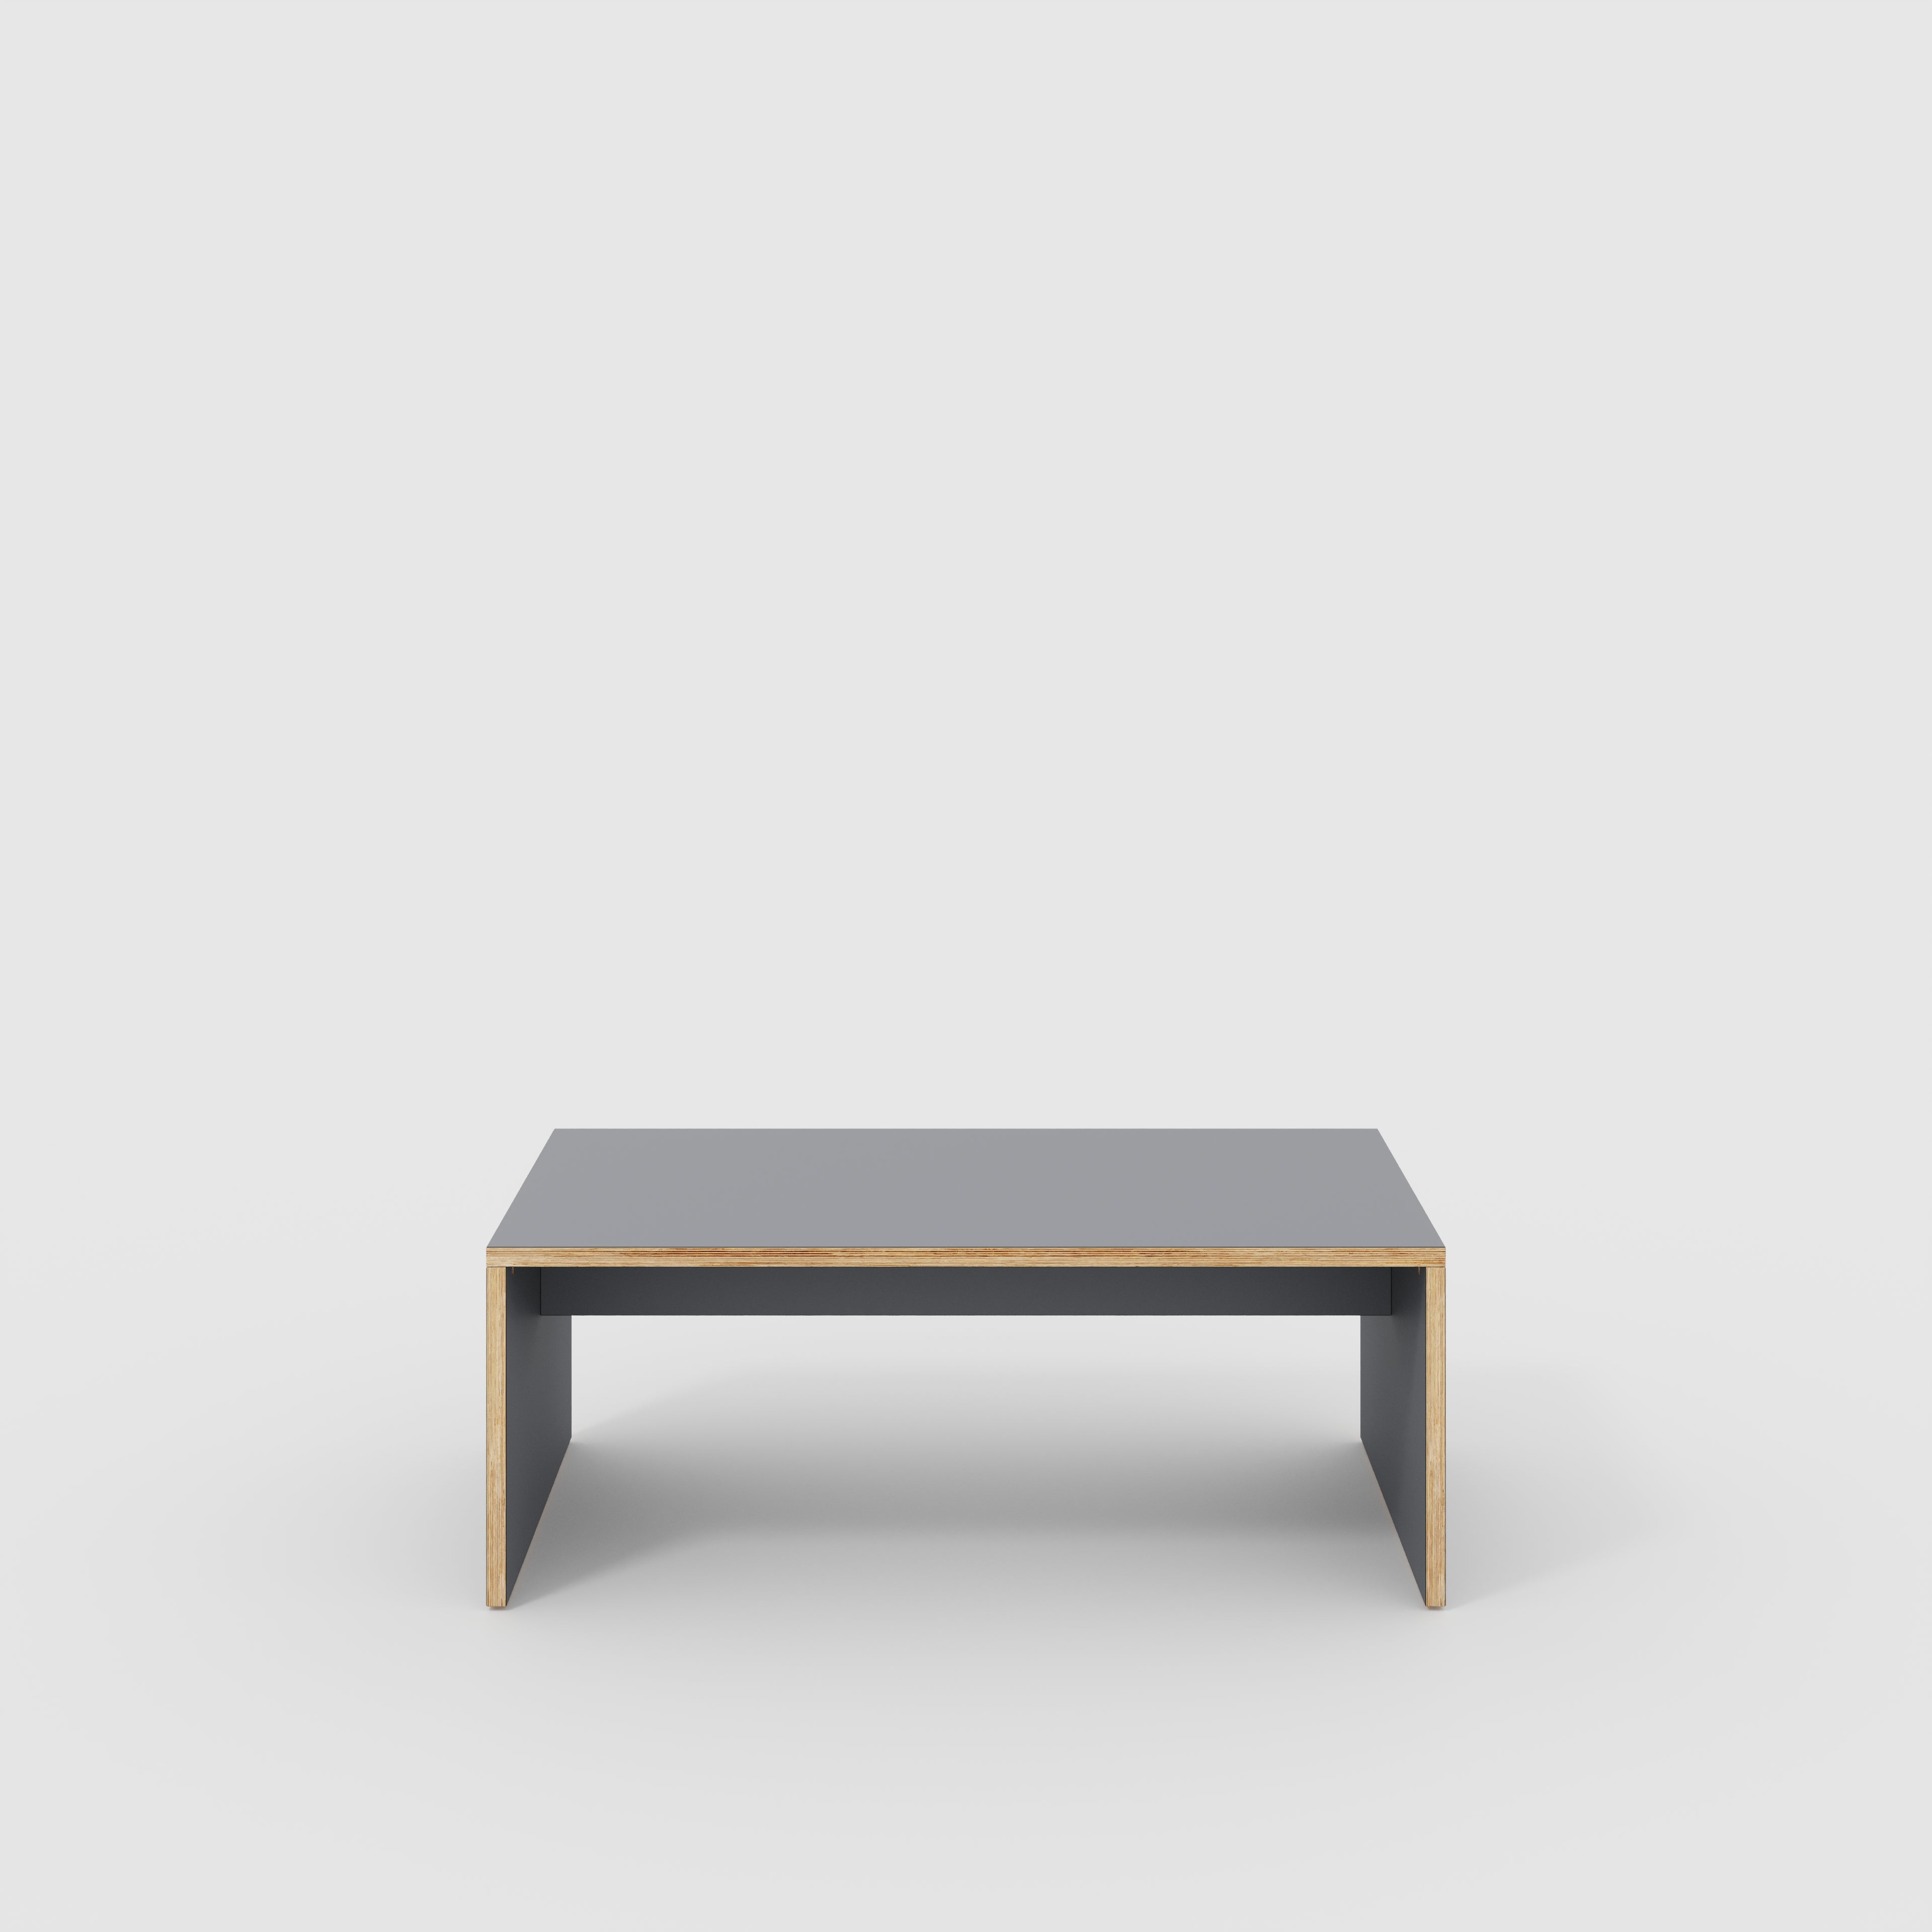 Coffee Table with Solid Sides - Formica Tornado Grey - 1200(w) x 600(d) x 450(h)